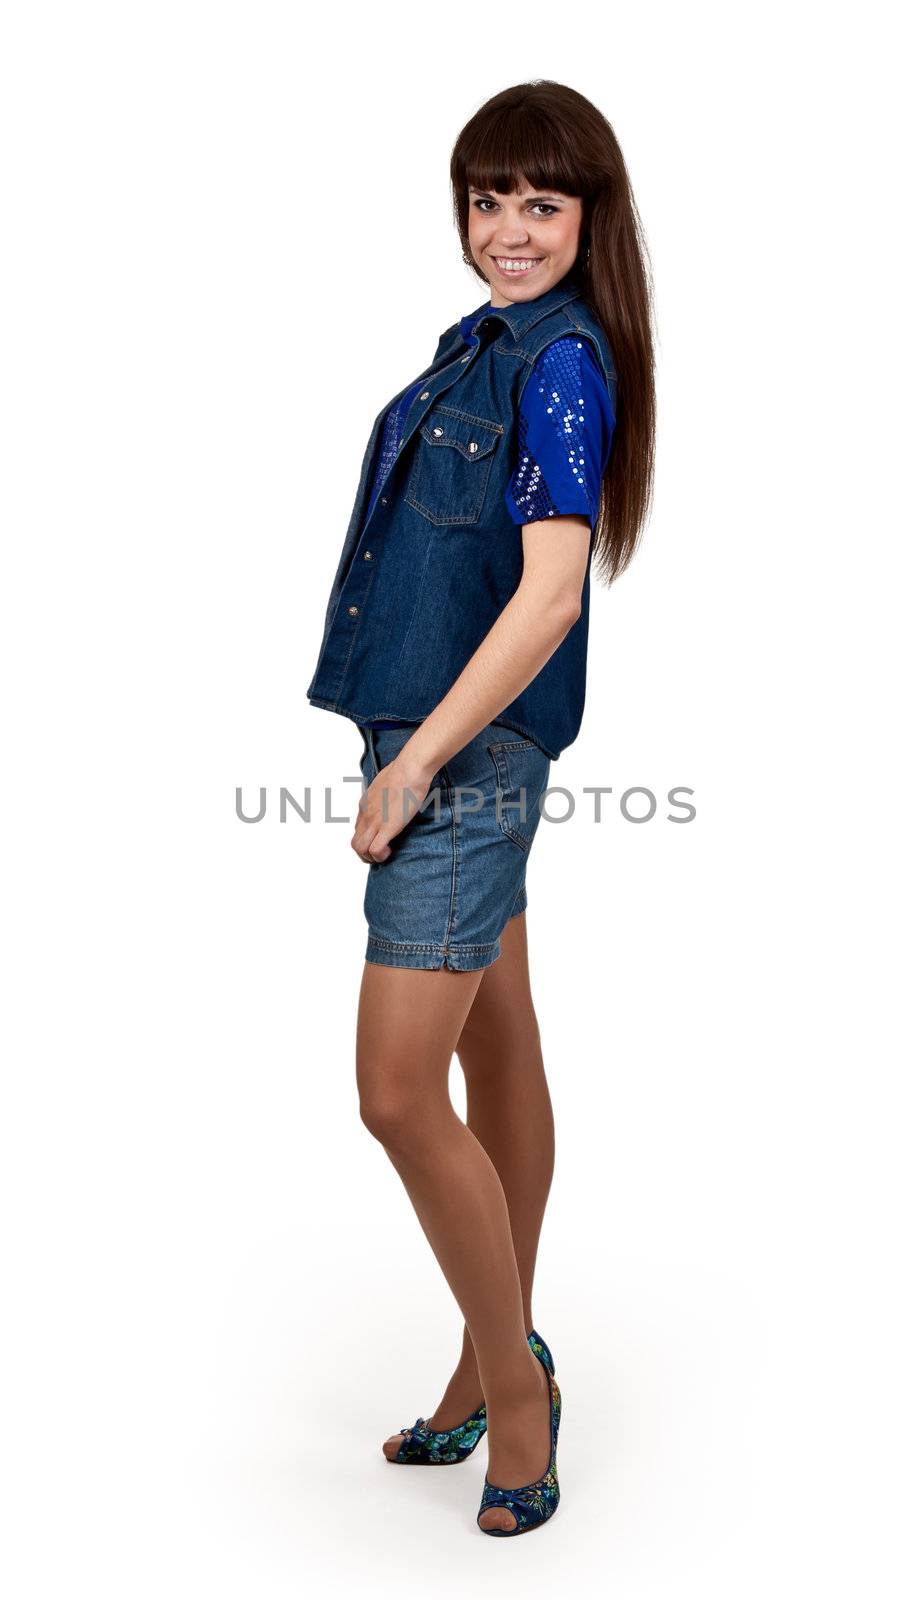 girl in denim shorts on a white background